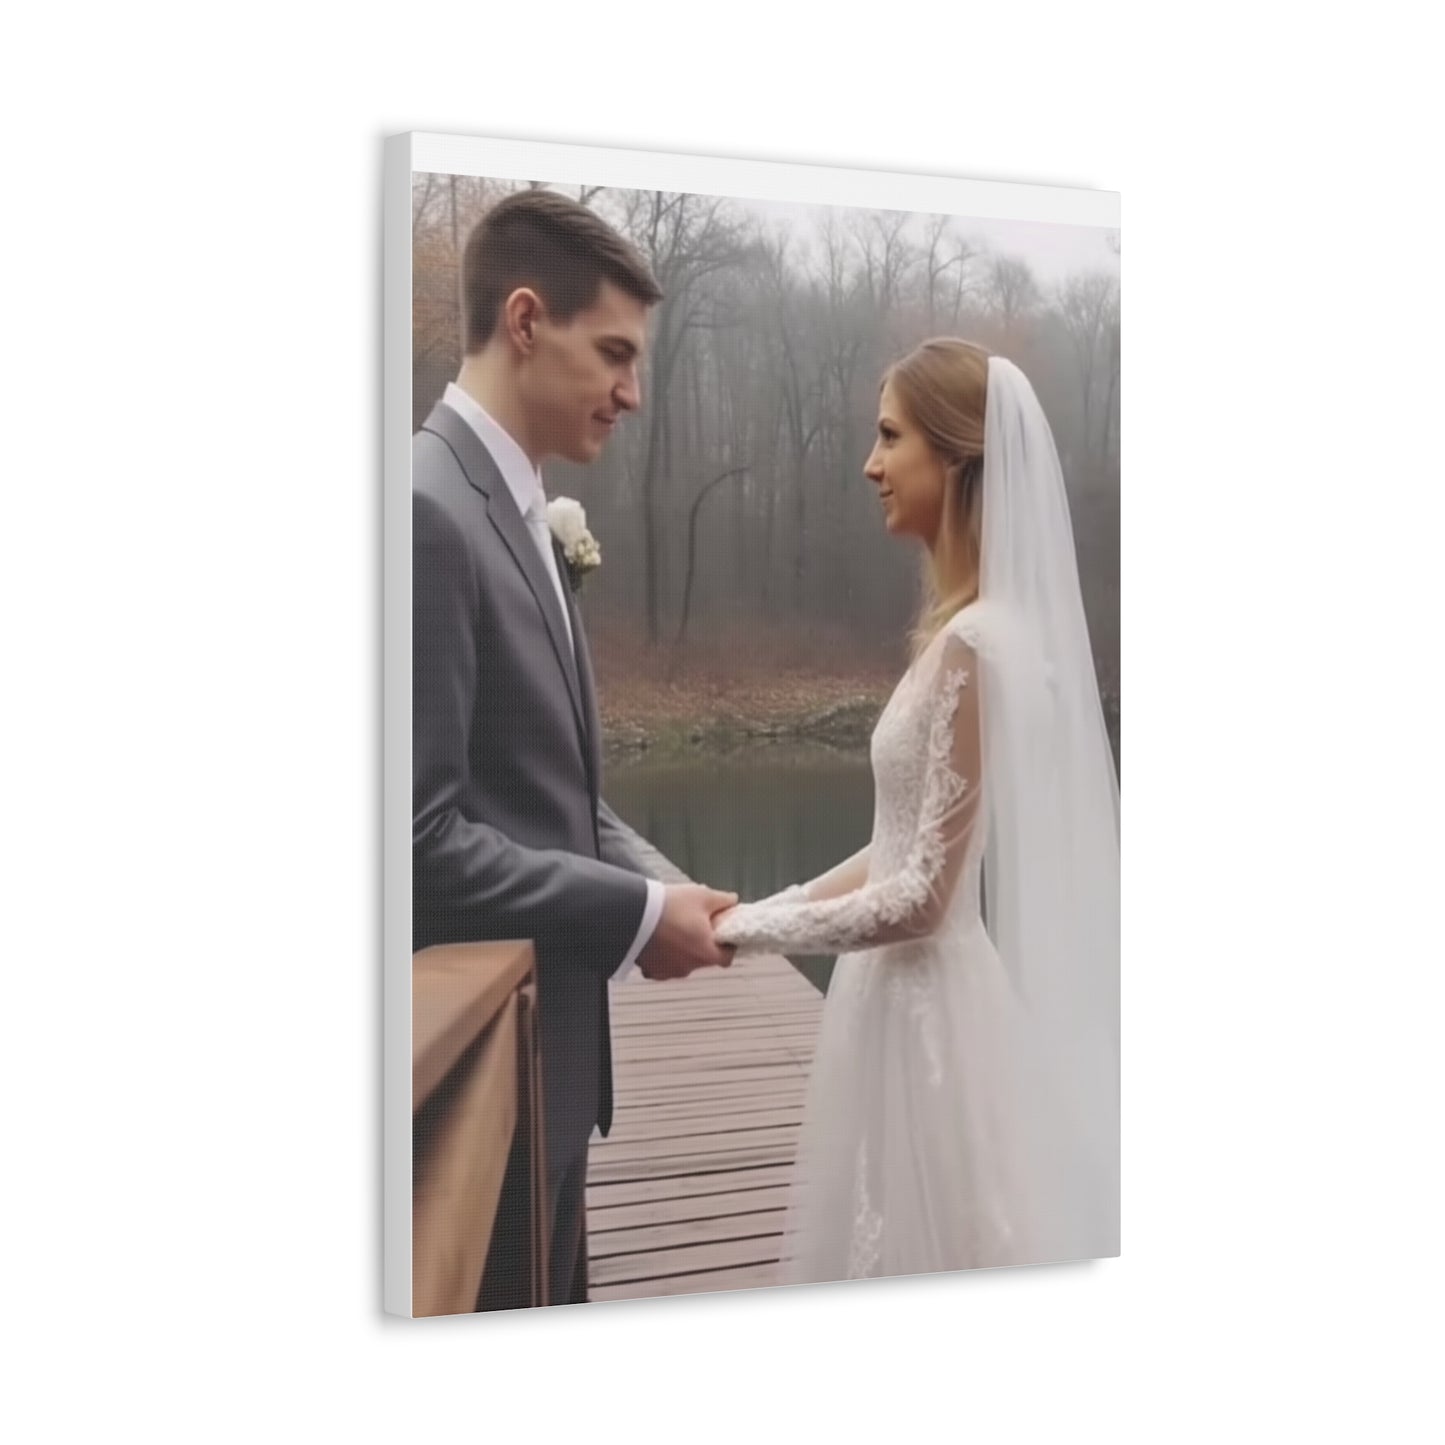 "Wedding Day" Custom Photo Wall Print - Weave Got Gifts - Unique Gifts You Won’t Find Anywhere Else!